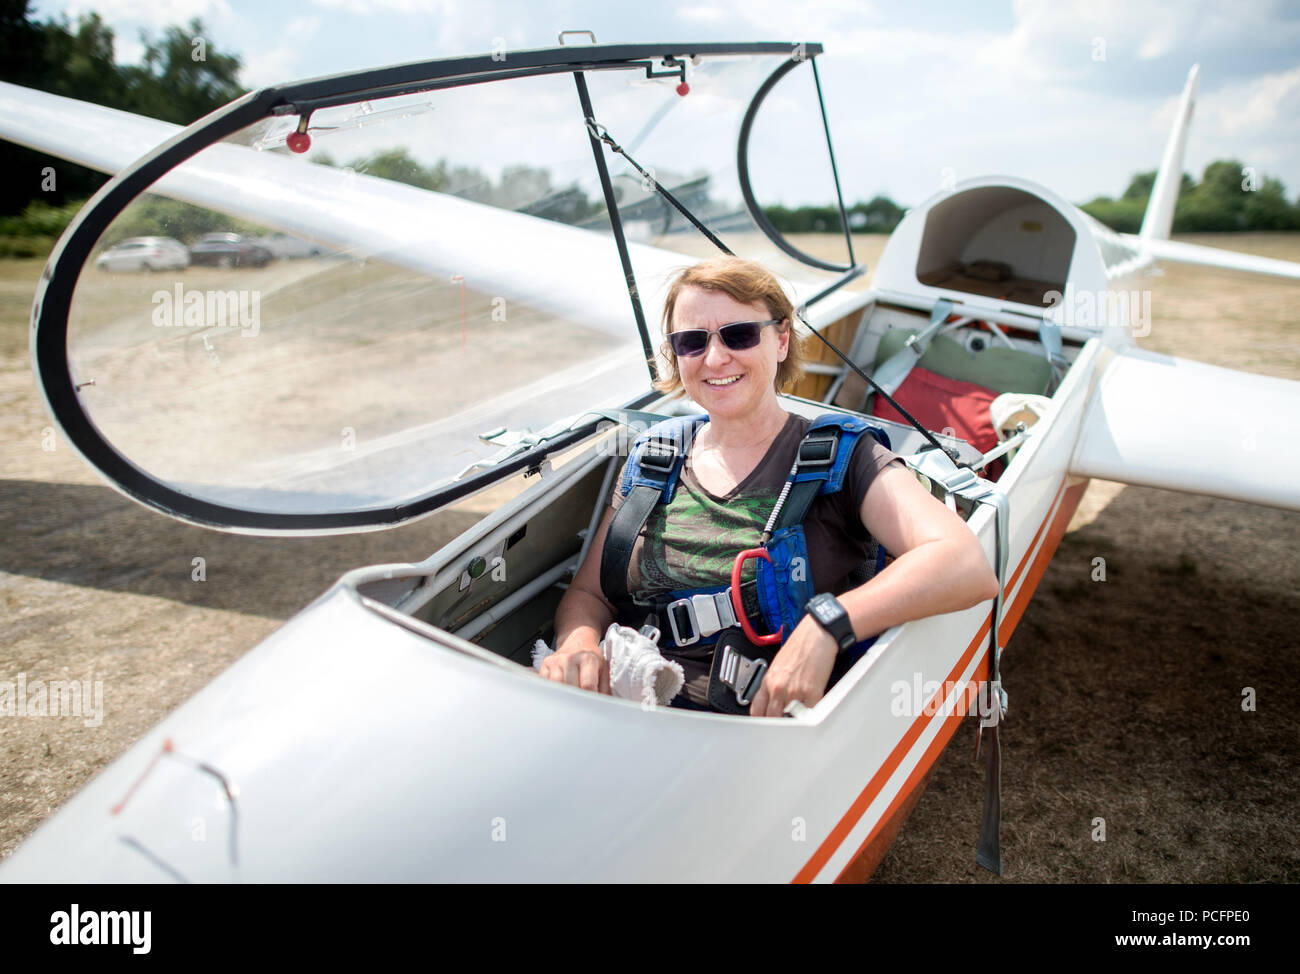 Burgdorf, Germany. 25th July, 2018. Astrid Angermann, longtime glider pilot of the Burgdorf Air Sports Club, sits in a glider on an airfield near Ramlingen. Credit: Hauke-Christian Dittrich/dpa/Alamy Live News Stock Photo